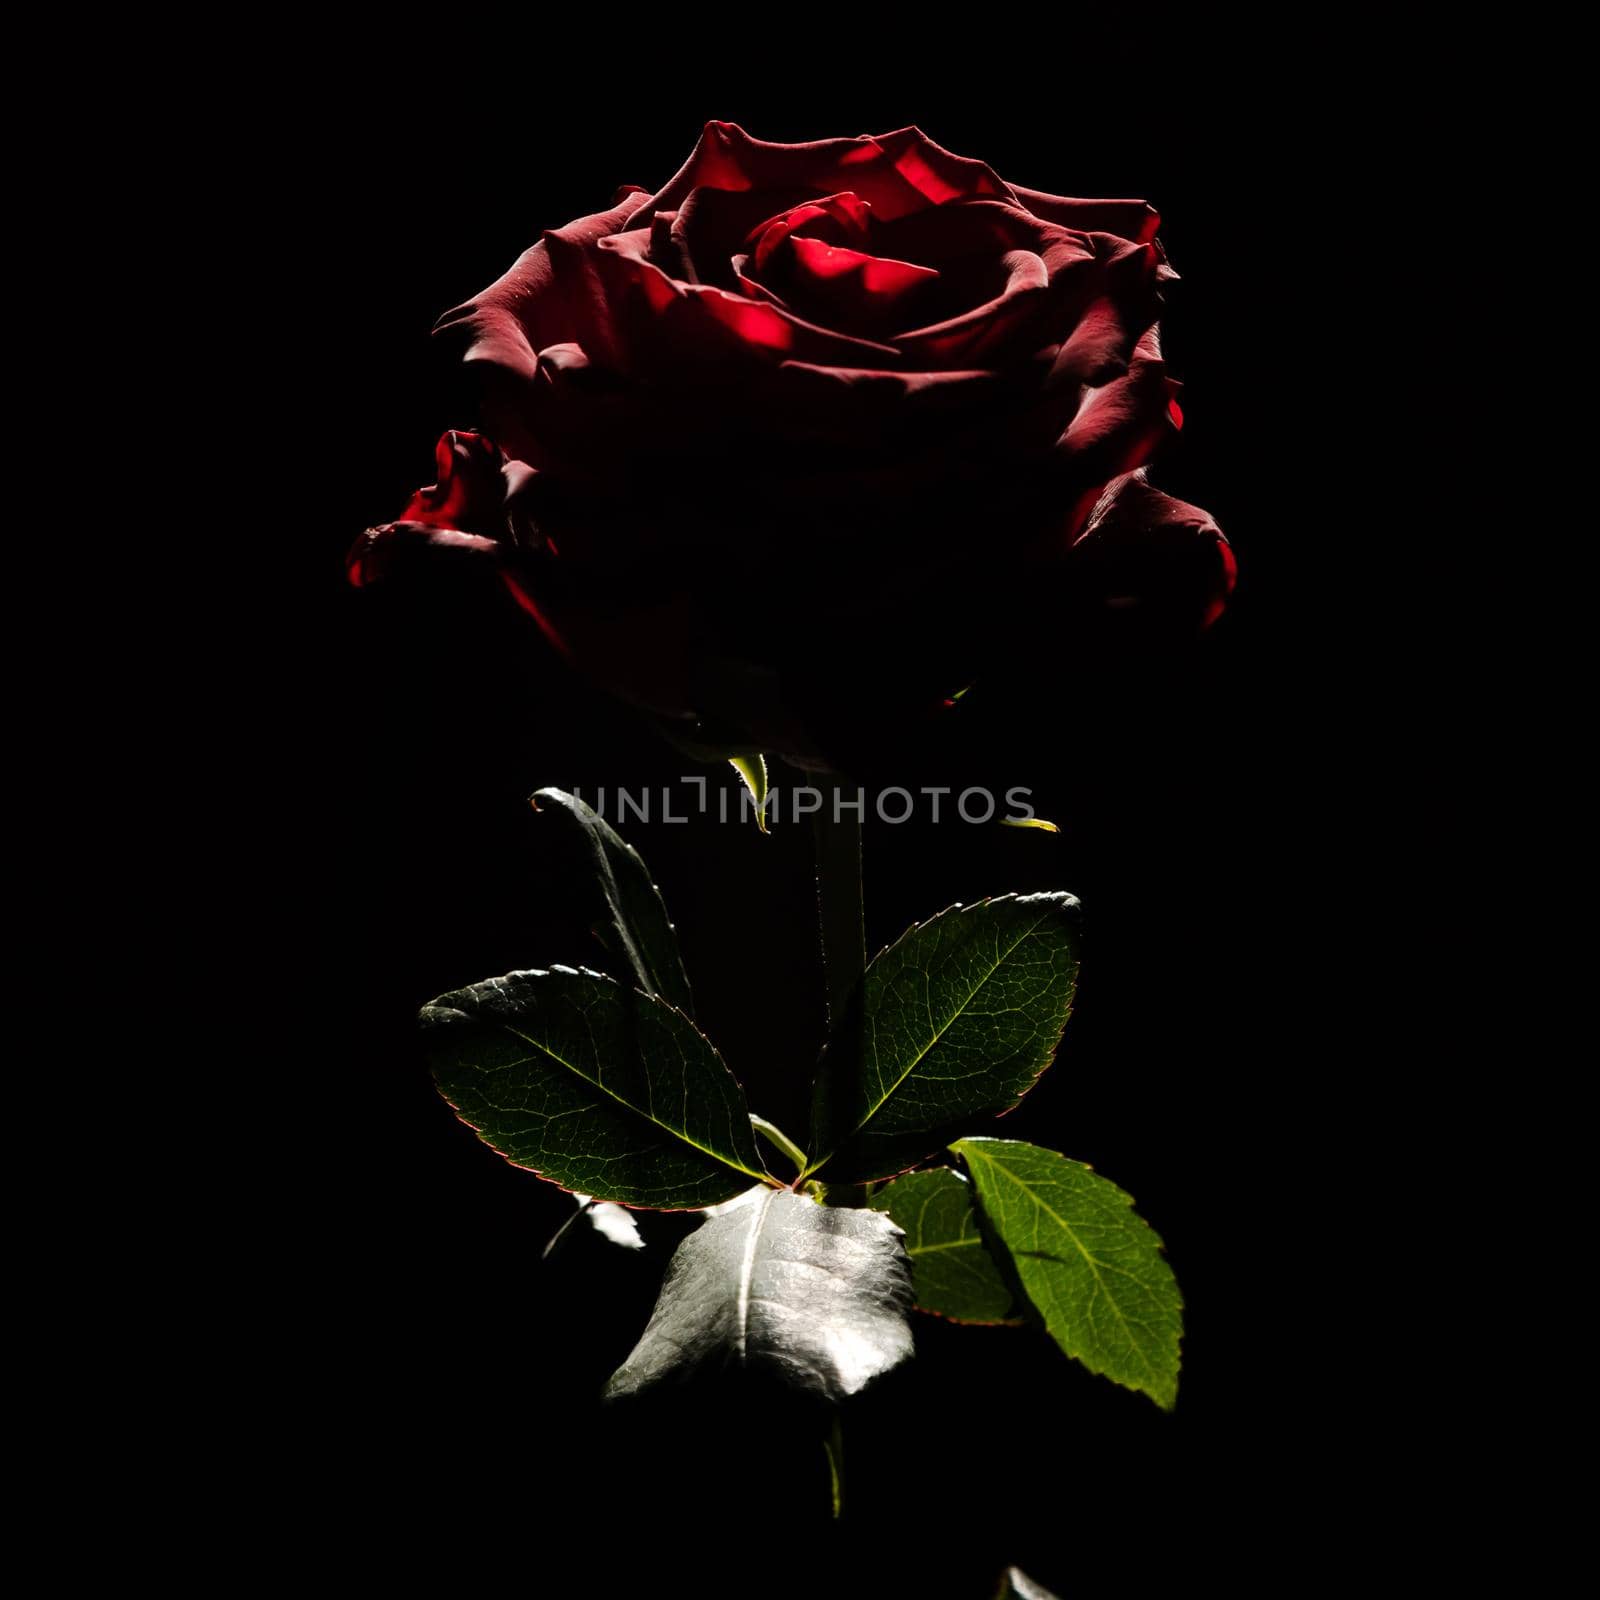 Blooming red rose bud on black background, use as wallpaper or background